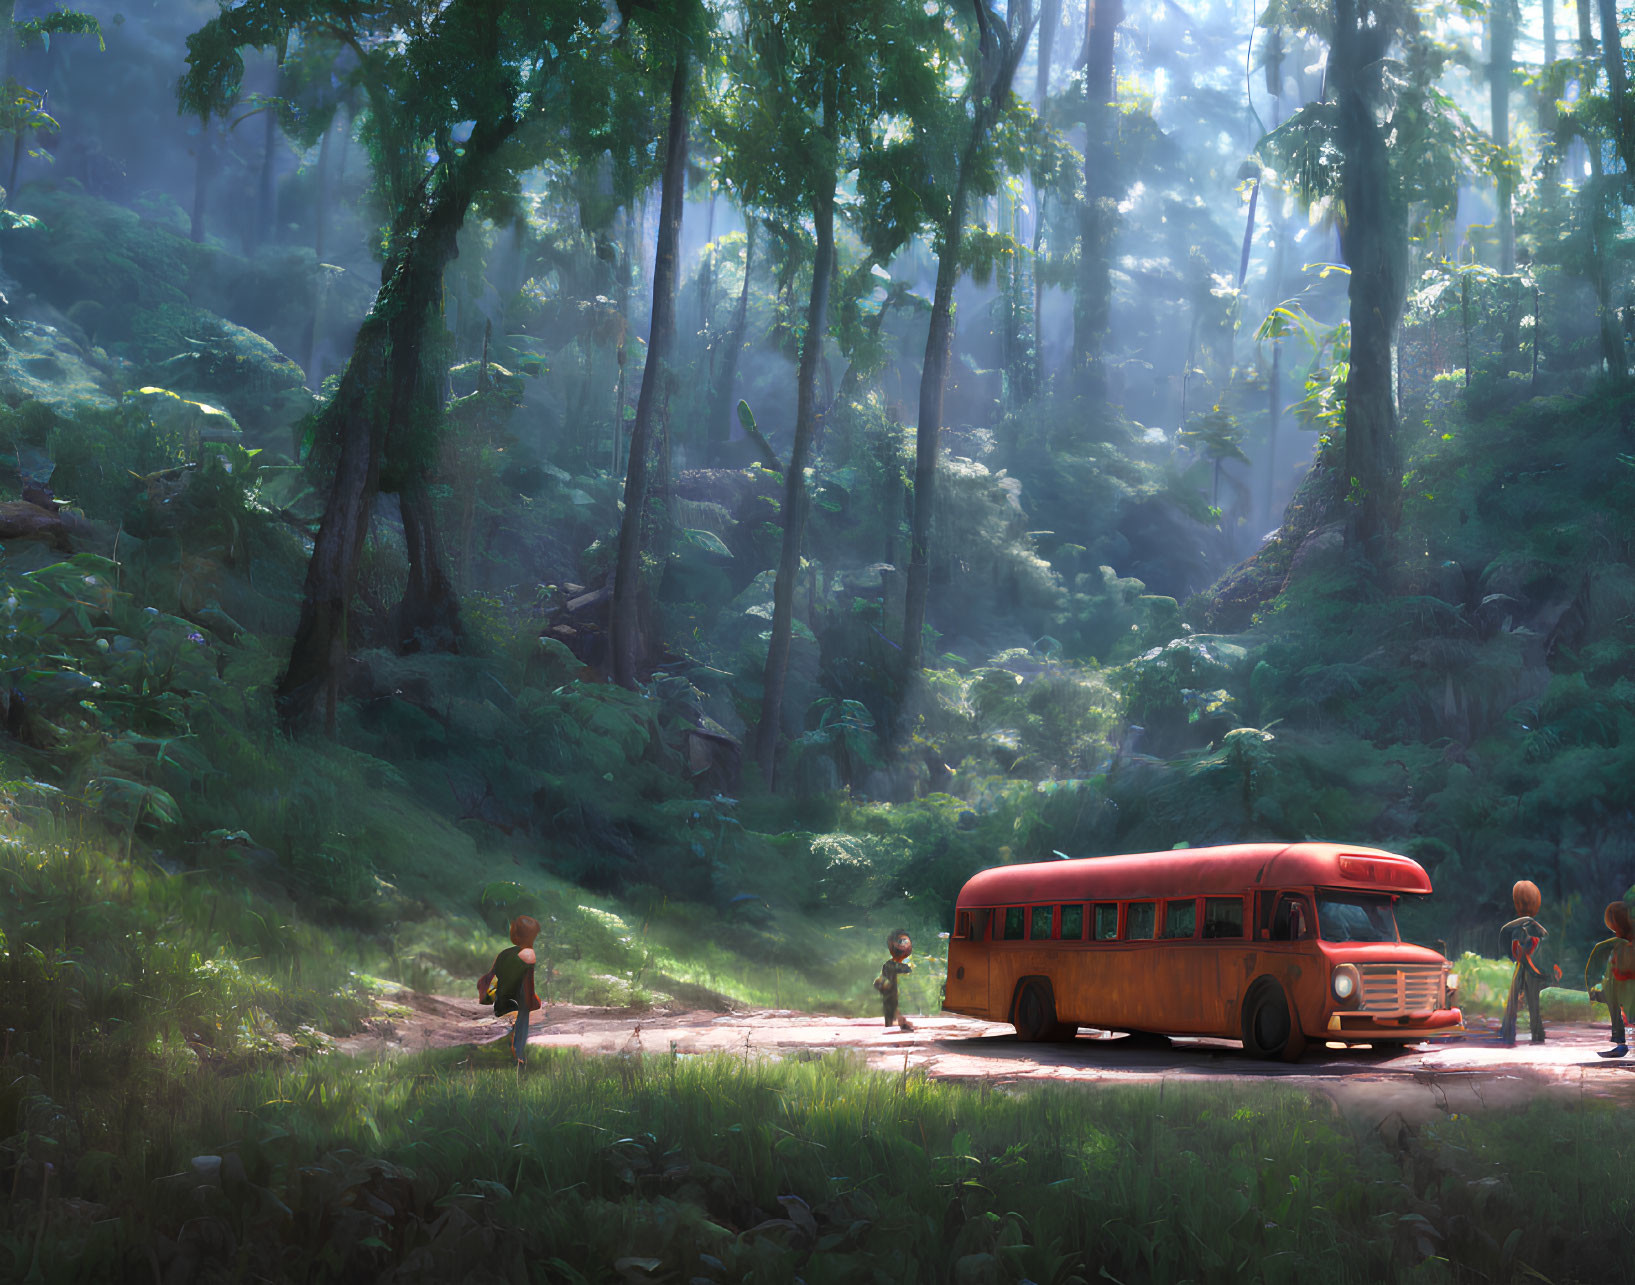 Children exiting vintage yellow school bus in forest sunlight.